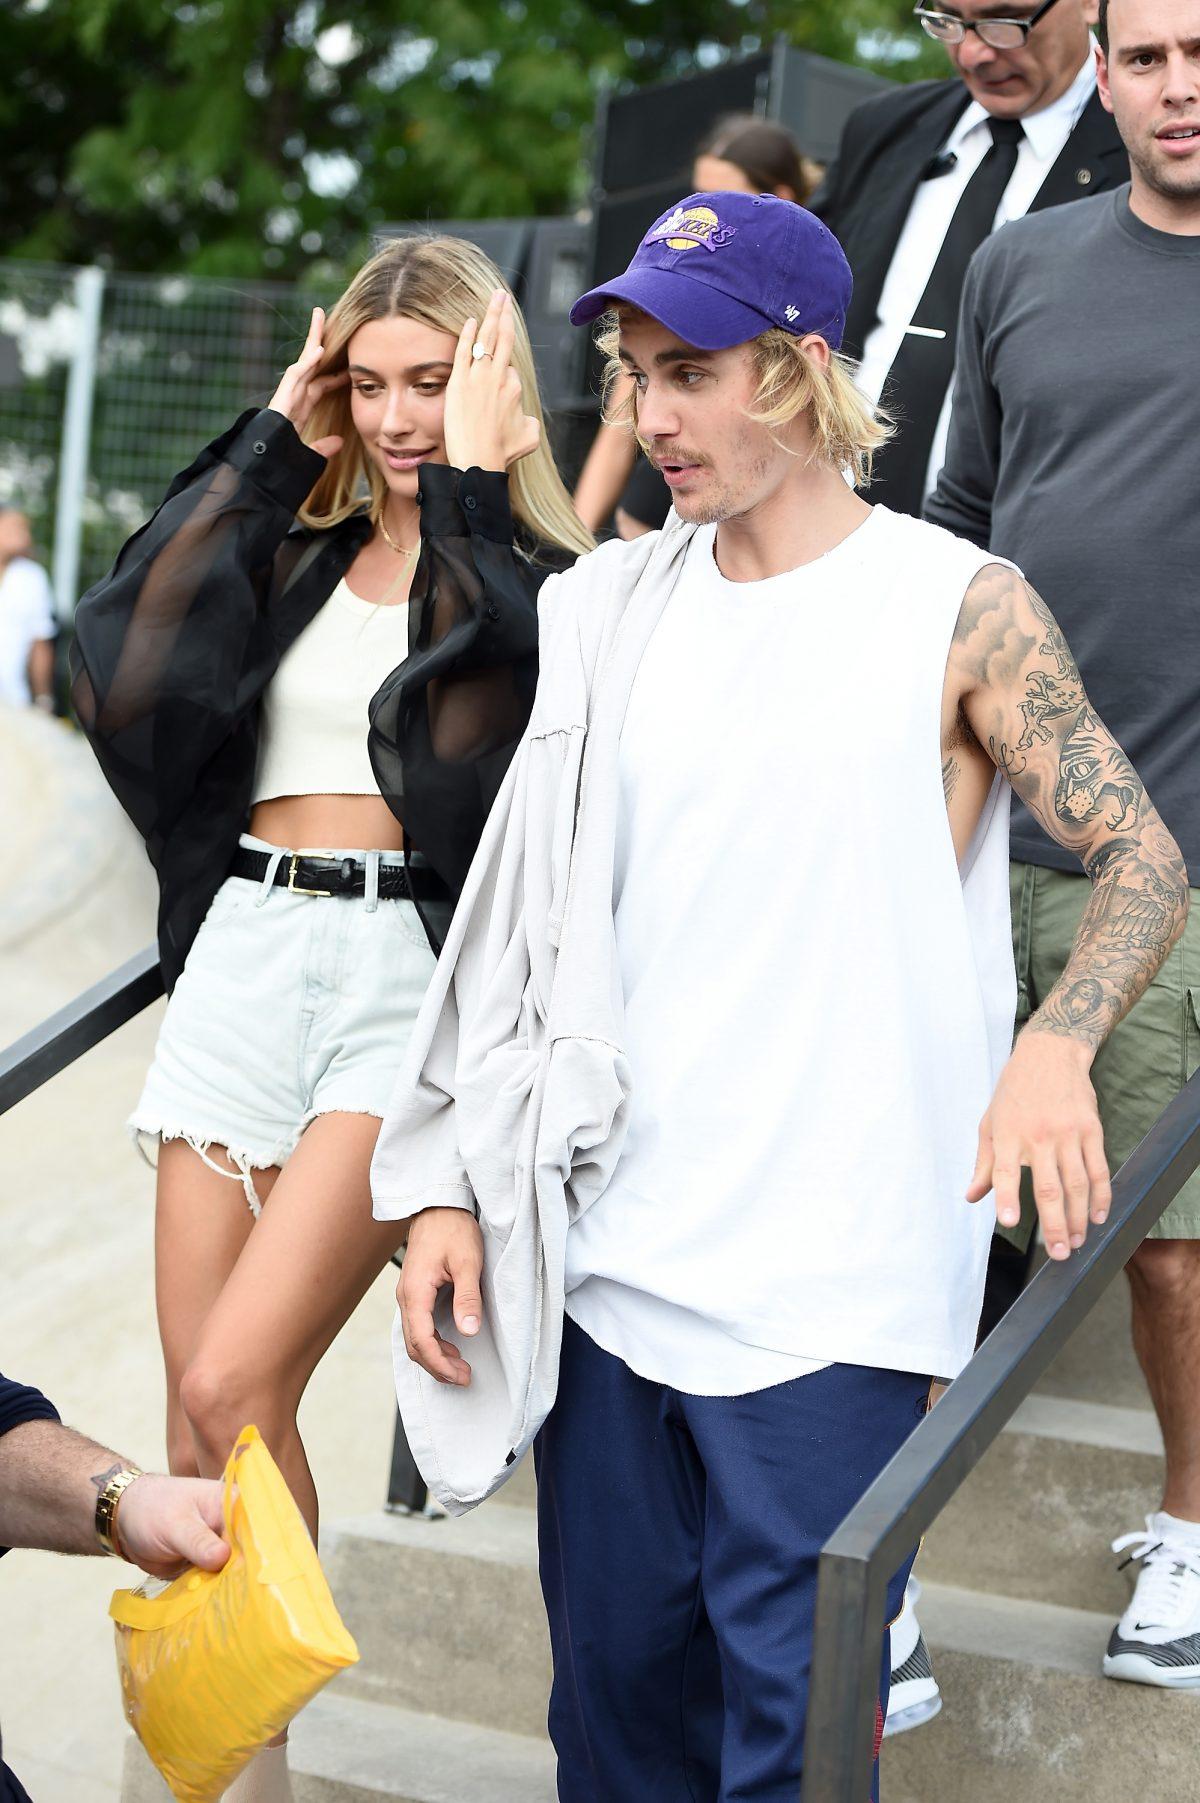 Hailey Baldwin (L) and Justin Bieber attend the John Elliott front row during New York Fashion Week: The Shows in New York City on Sept. 6, 2018. (Theo Wargo/Getty Images for NYFW: The Shows)